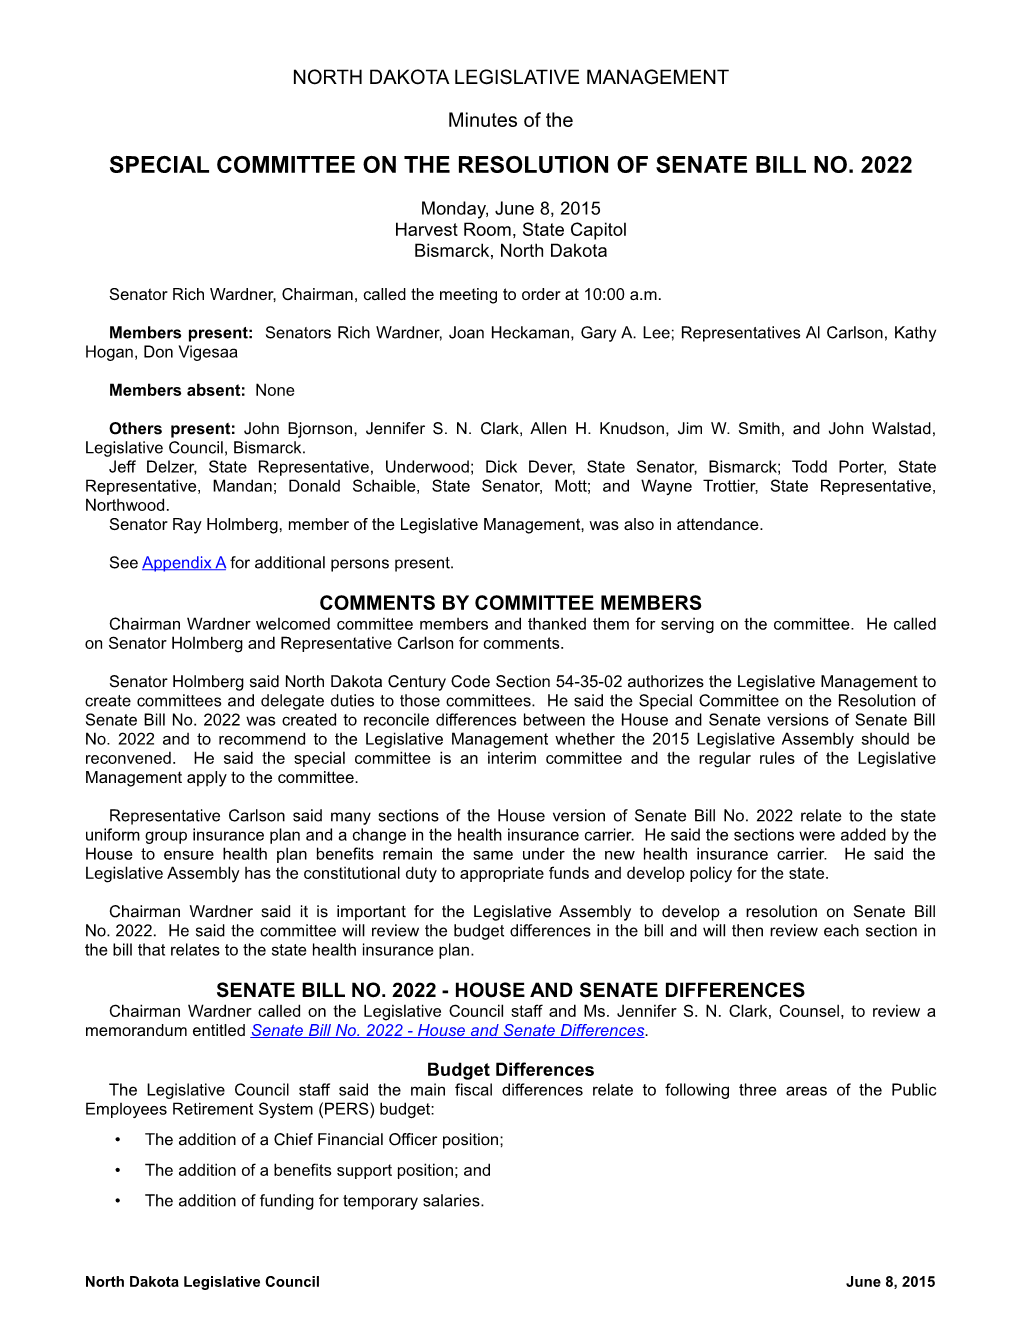 Special Committee on the Resolution of Senate Bill No. 2022